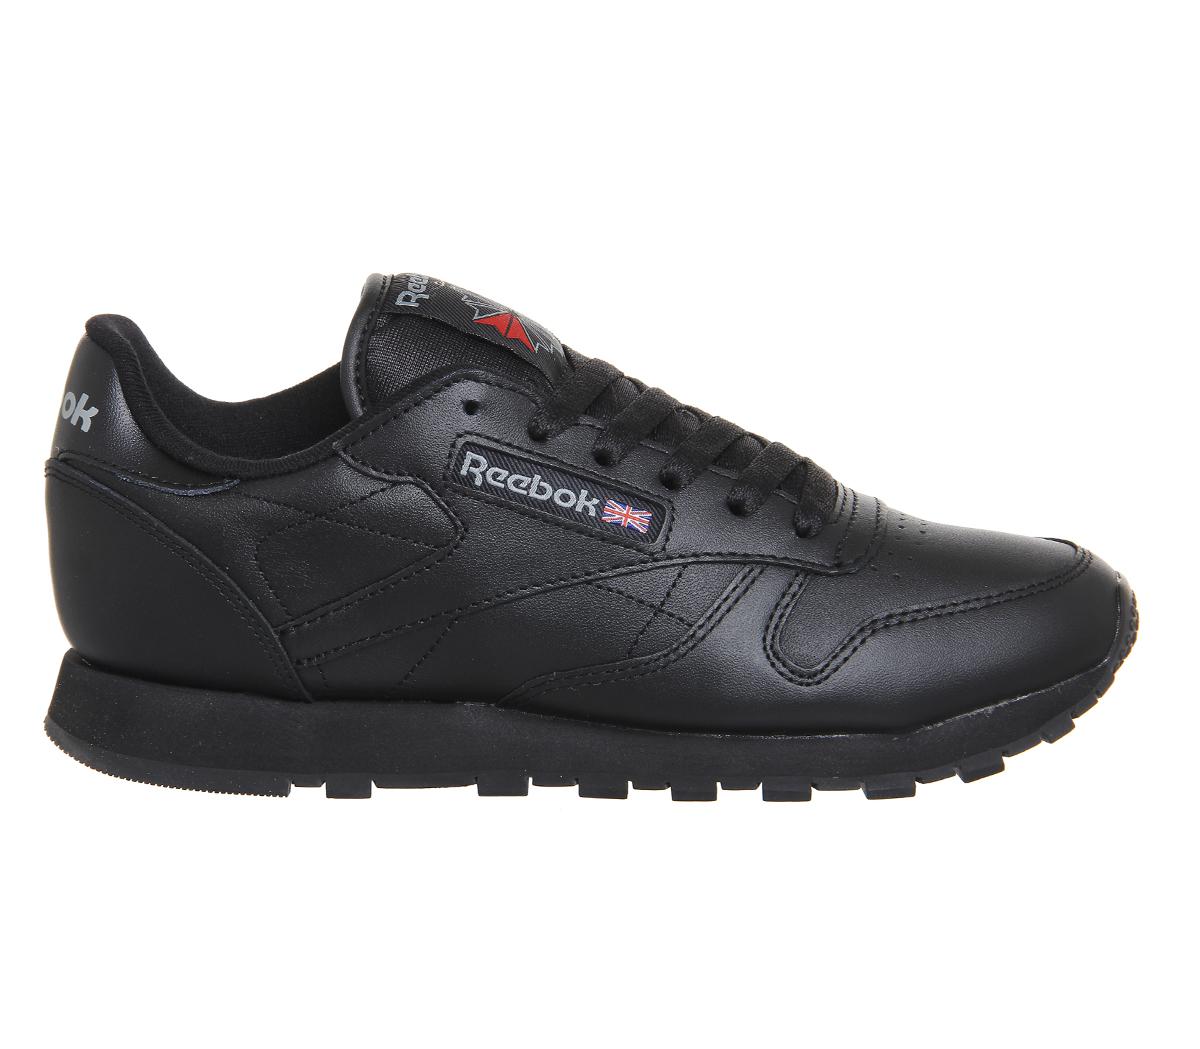 reebok classic leather trainers in black leather